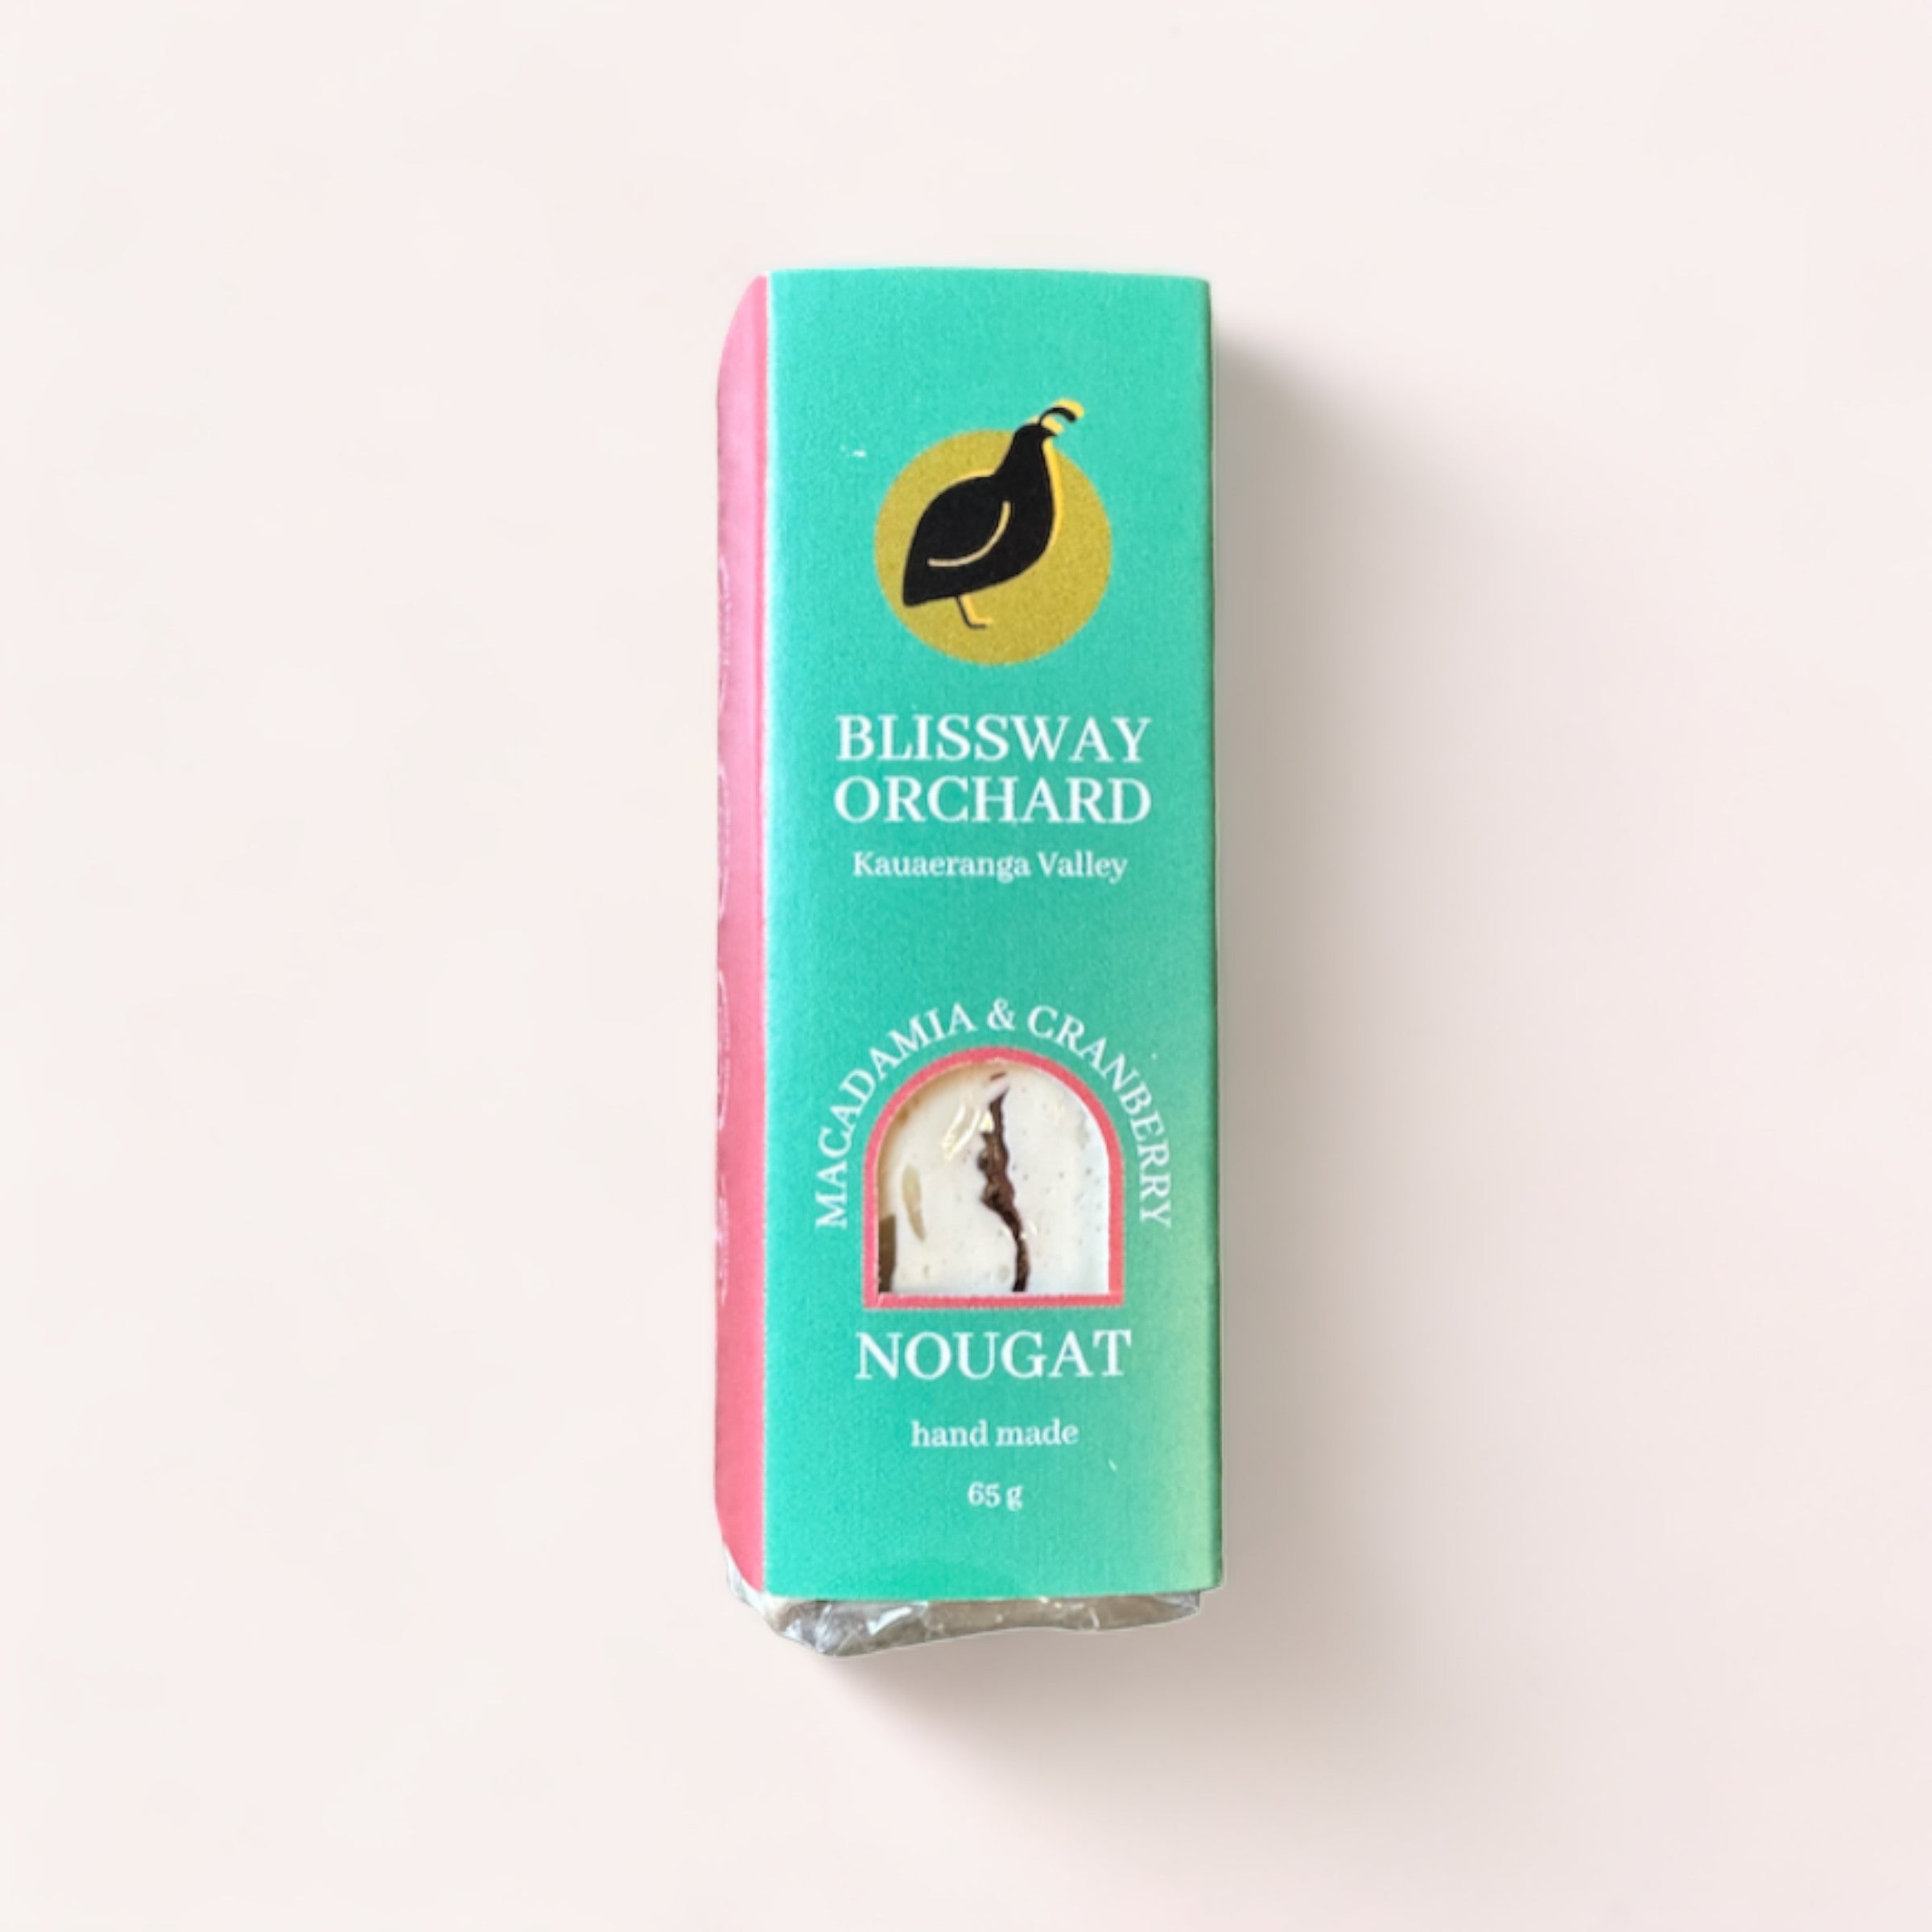 A package of Macadamia & Cranberry Nougat by Blissway Orchard, featuring handmade nougat with New Zealand macadamias & cranberry, 65g.